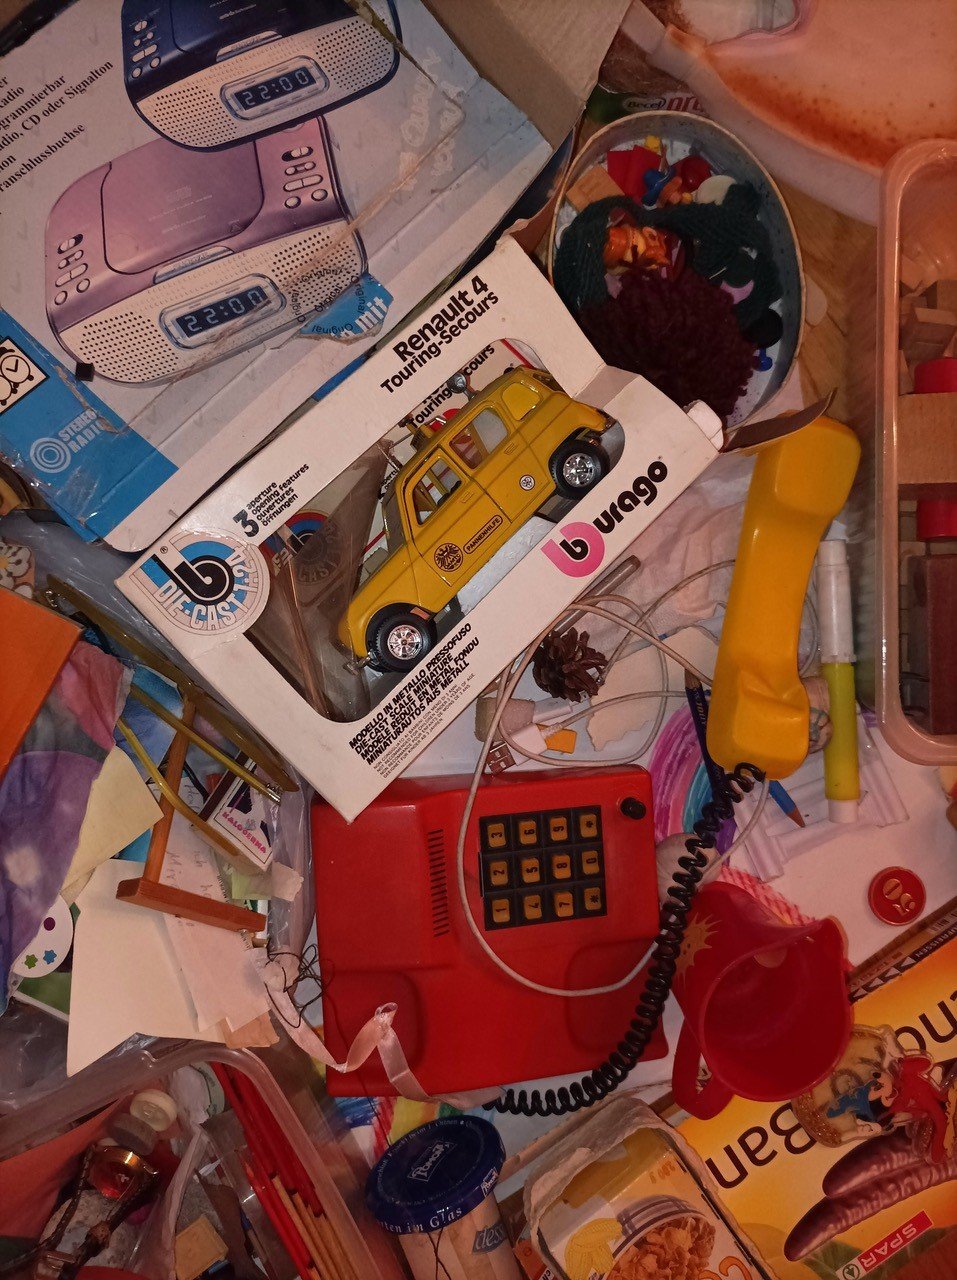 Cutout jumbled on the floor; toys, boxes, notes and other stuff. Present is an original packed yellow model car and a red and yellow toy phone.